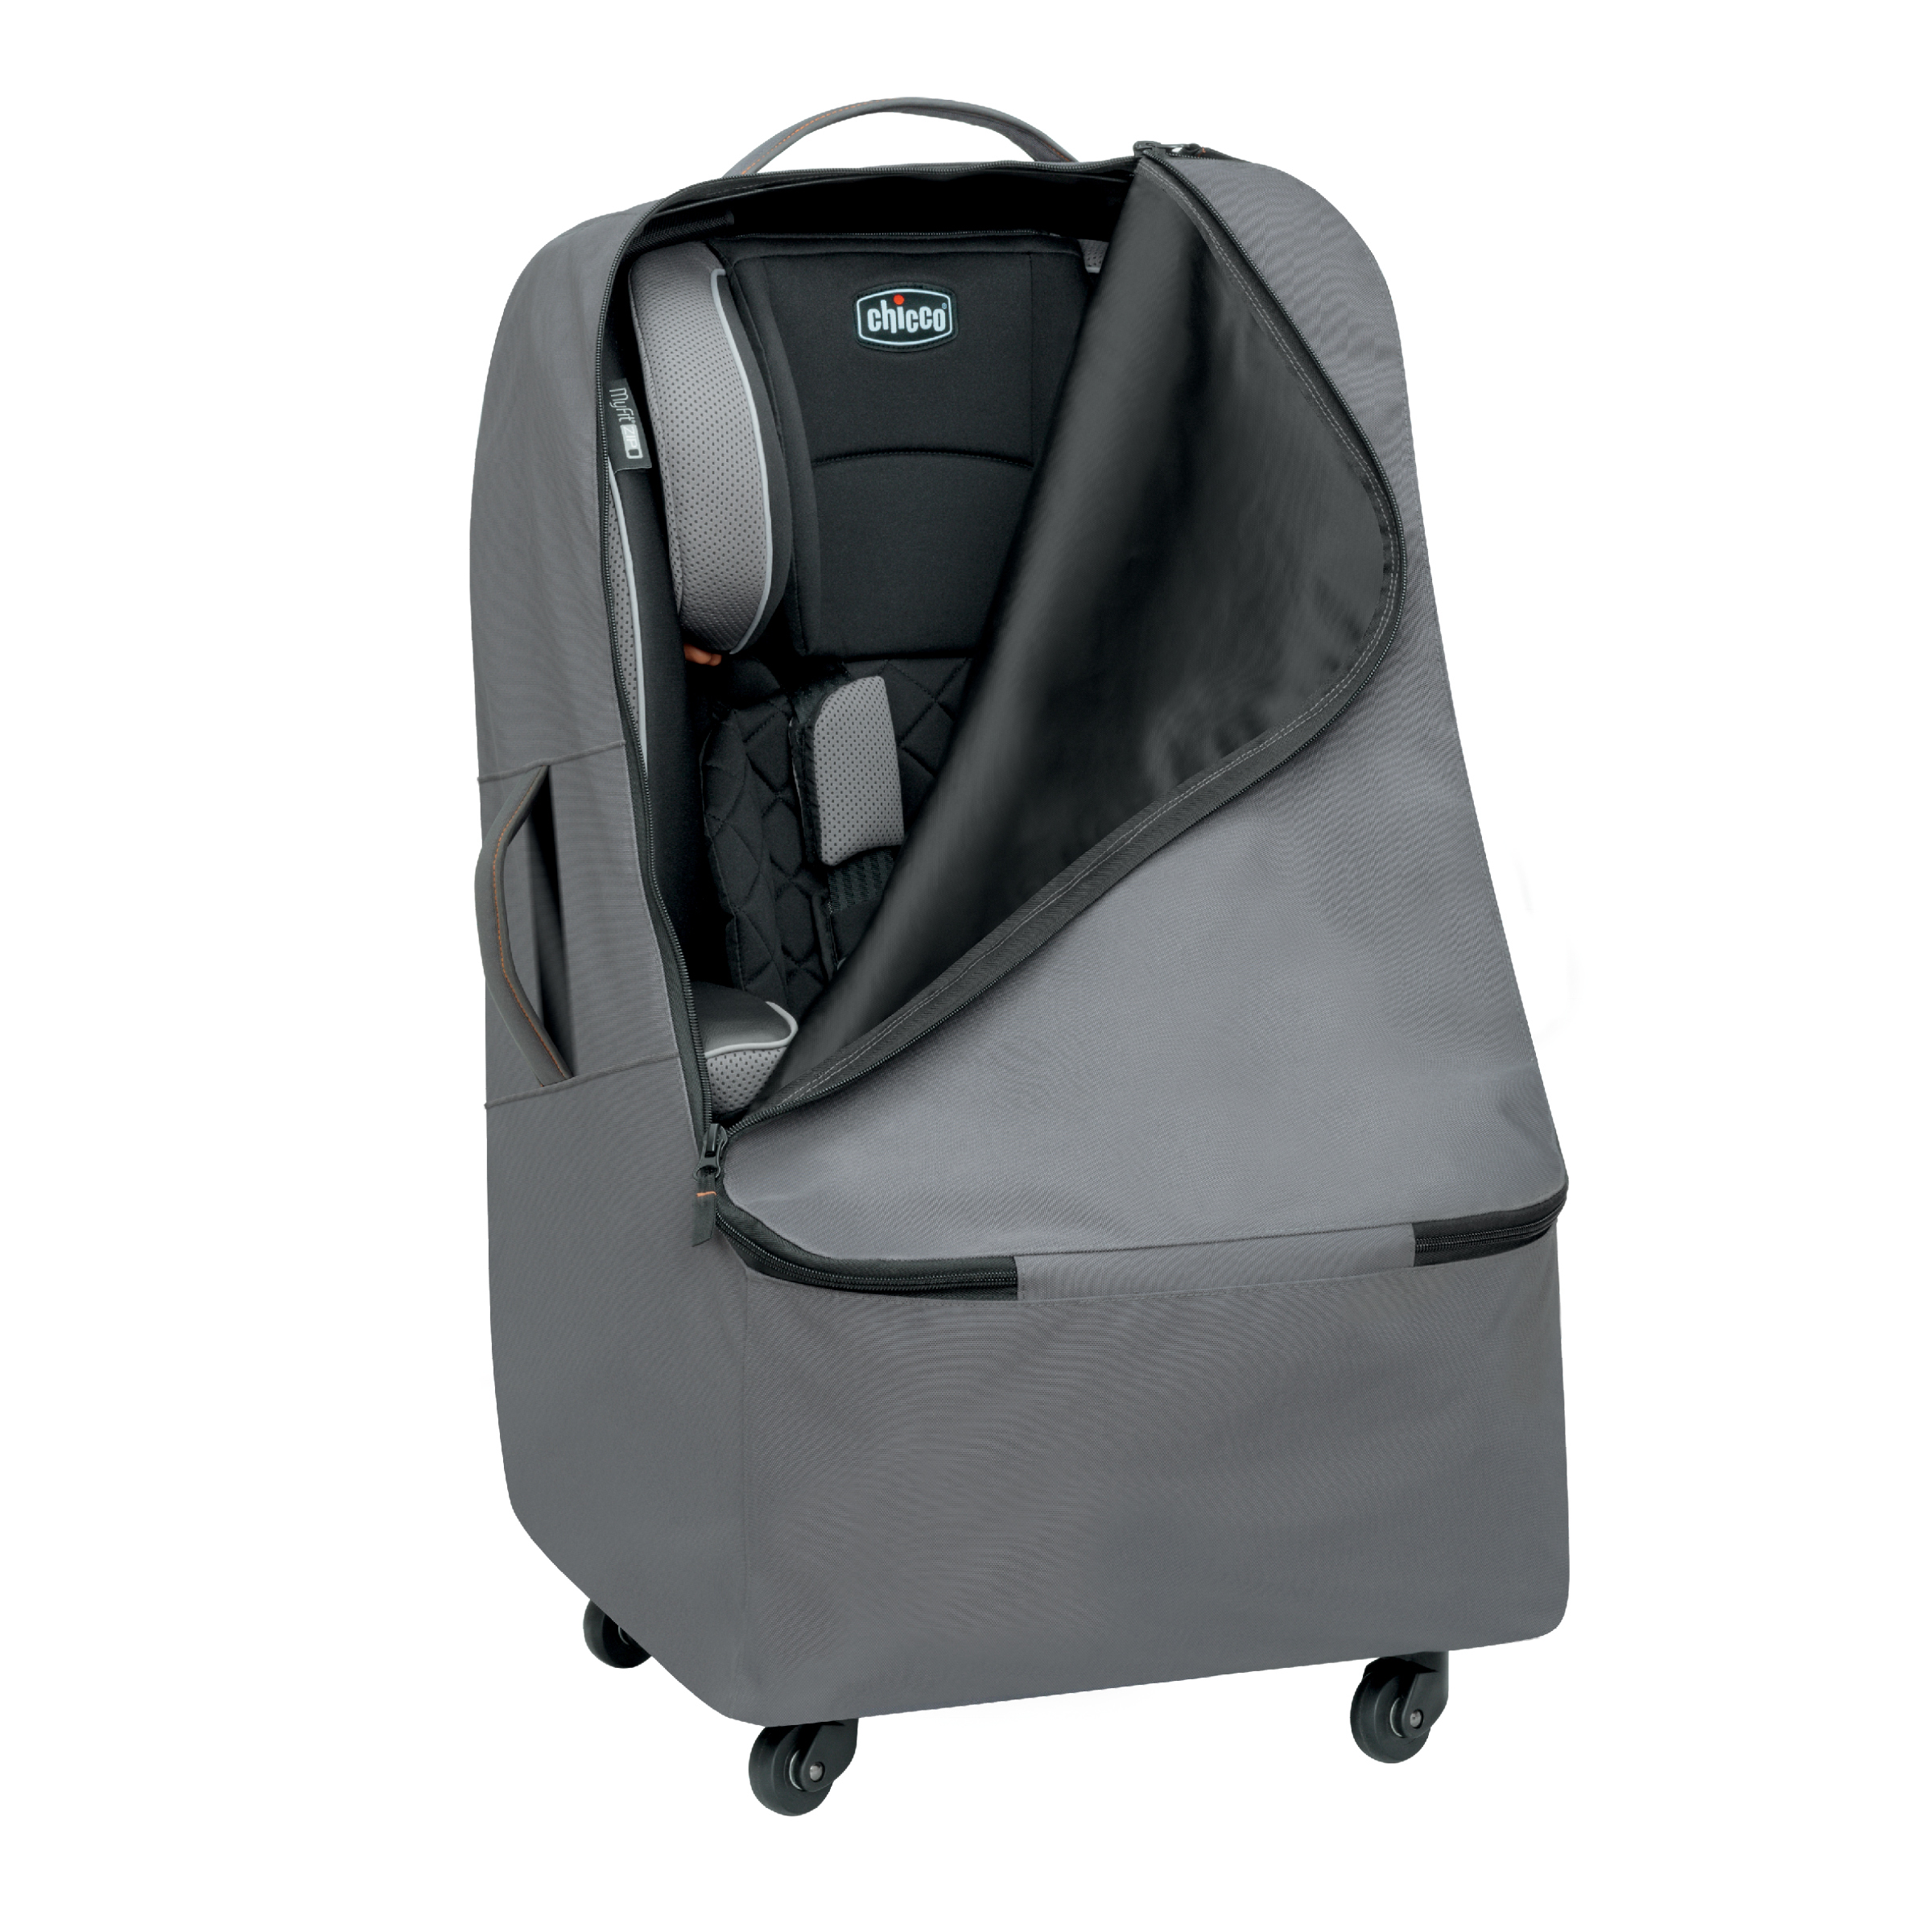 Chicco Car Seat Travel Bag with Spinner Wheels and Backpack Straps  Anthracite (Grey)